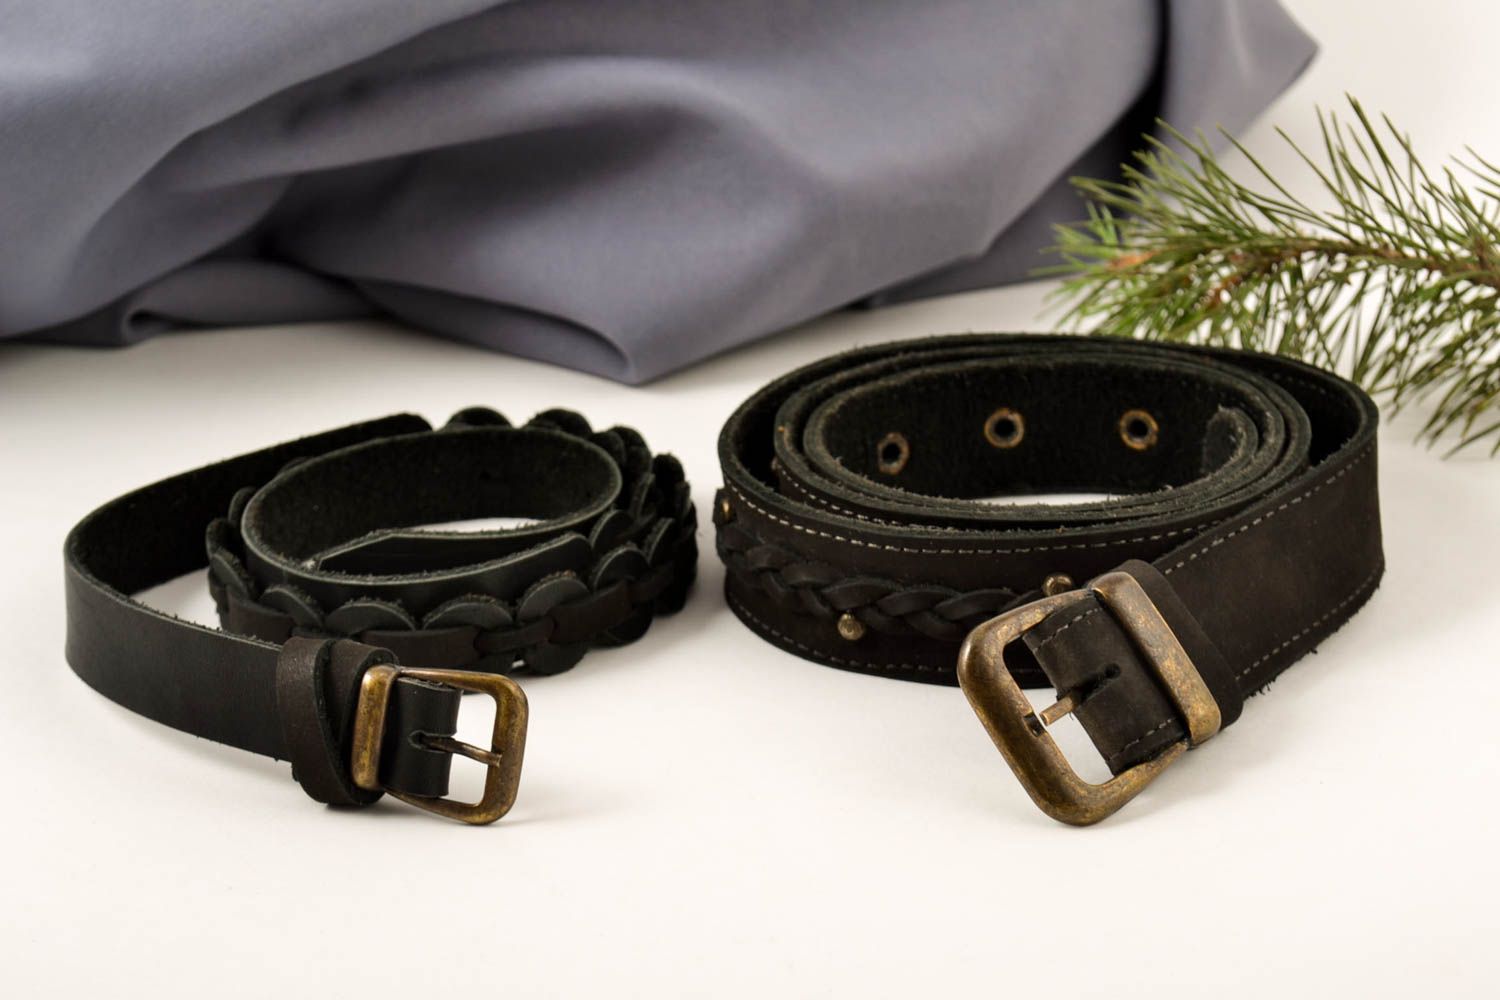 Handmade leather belts 2 belts for women designer accessories gifts for her photo 1